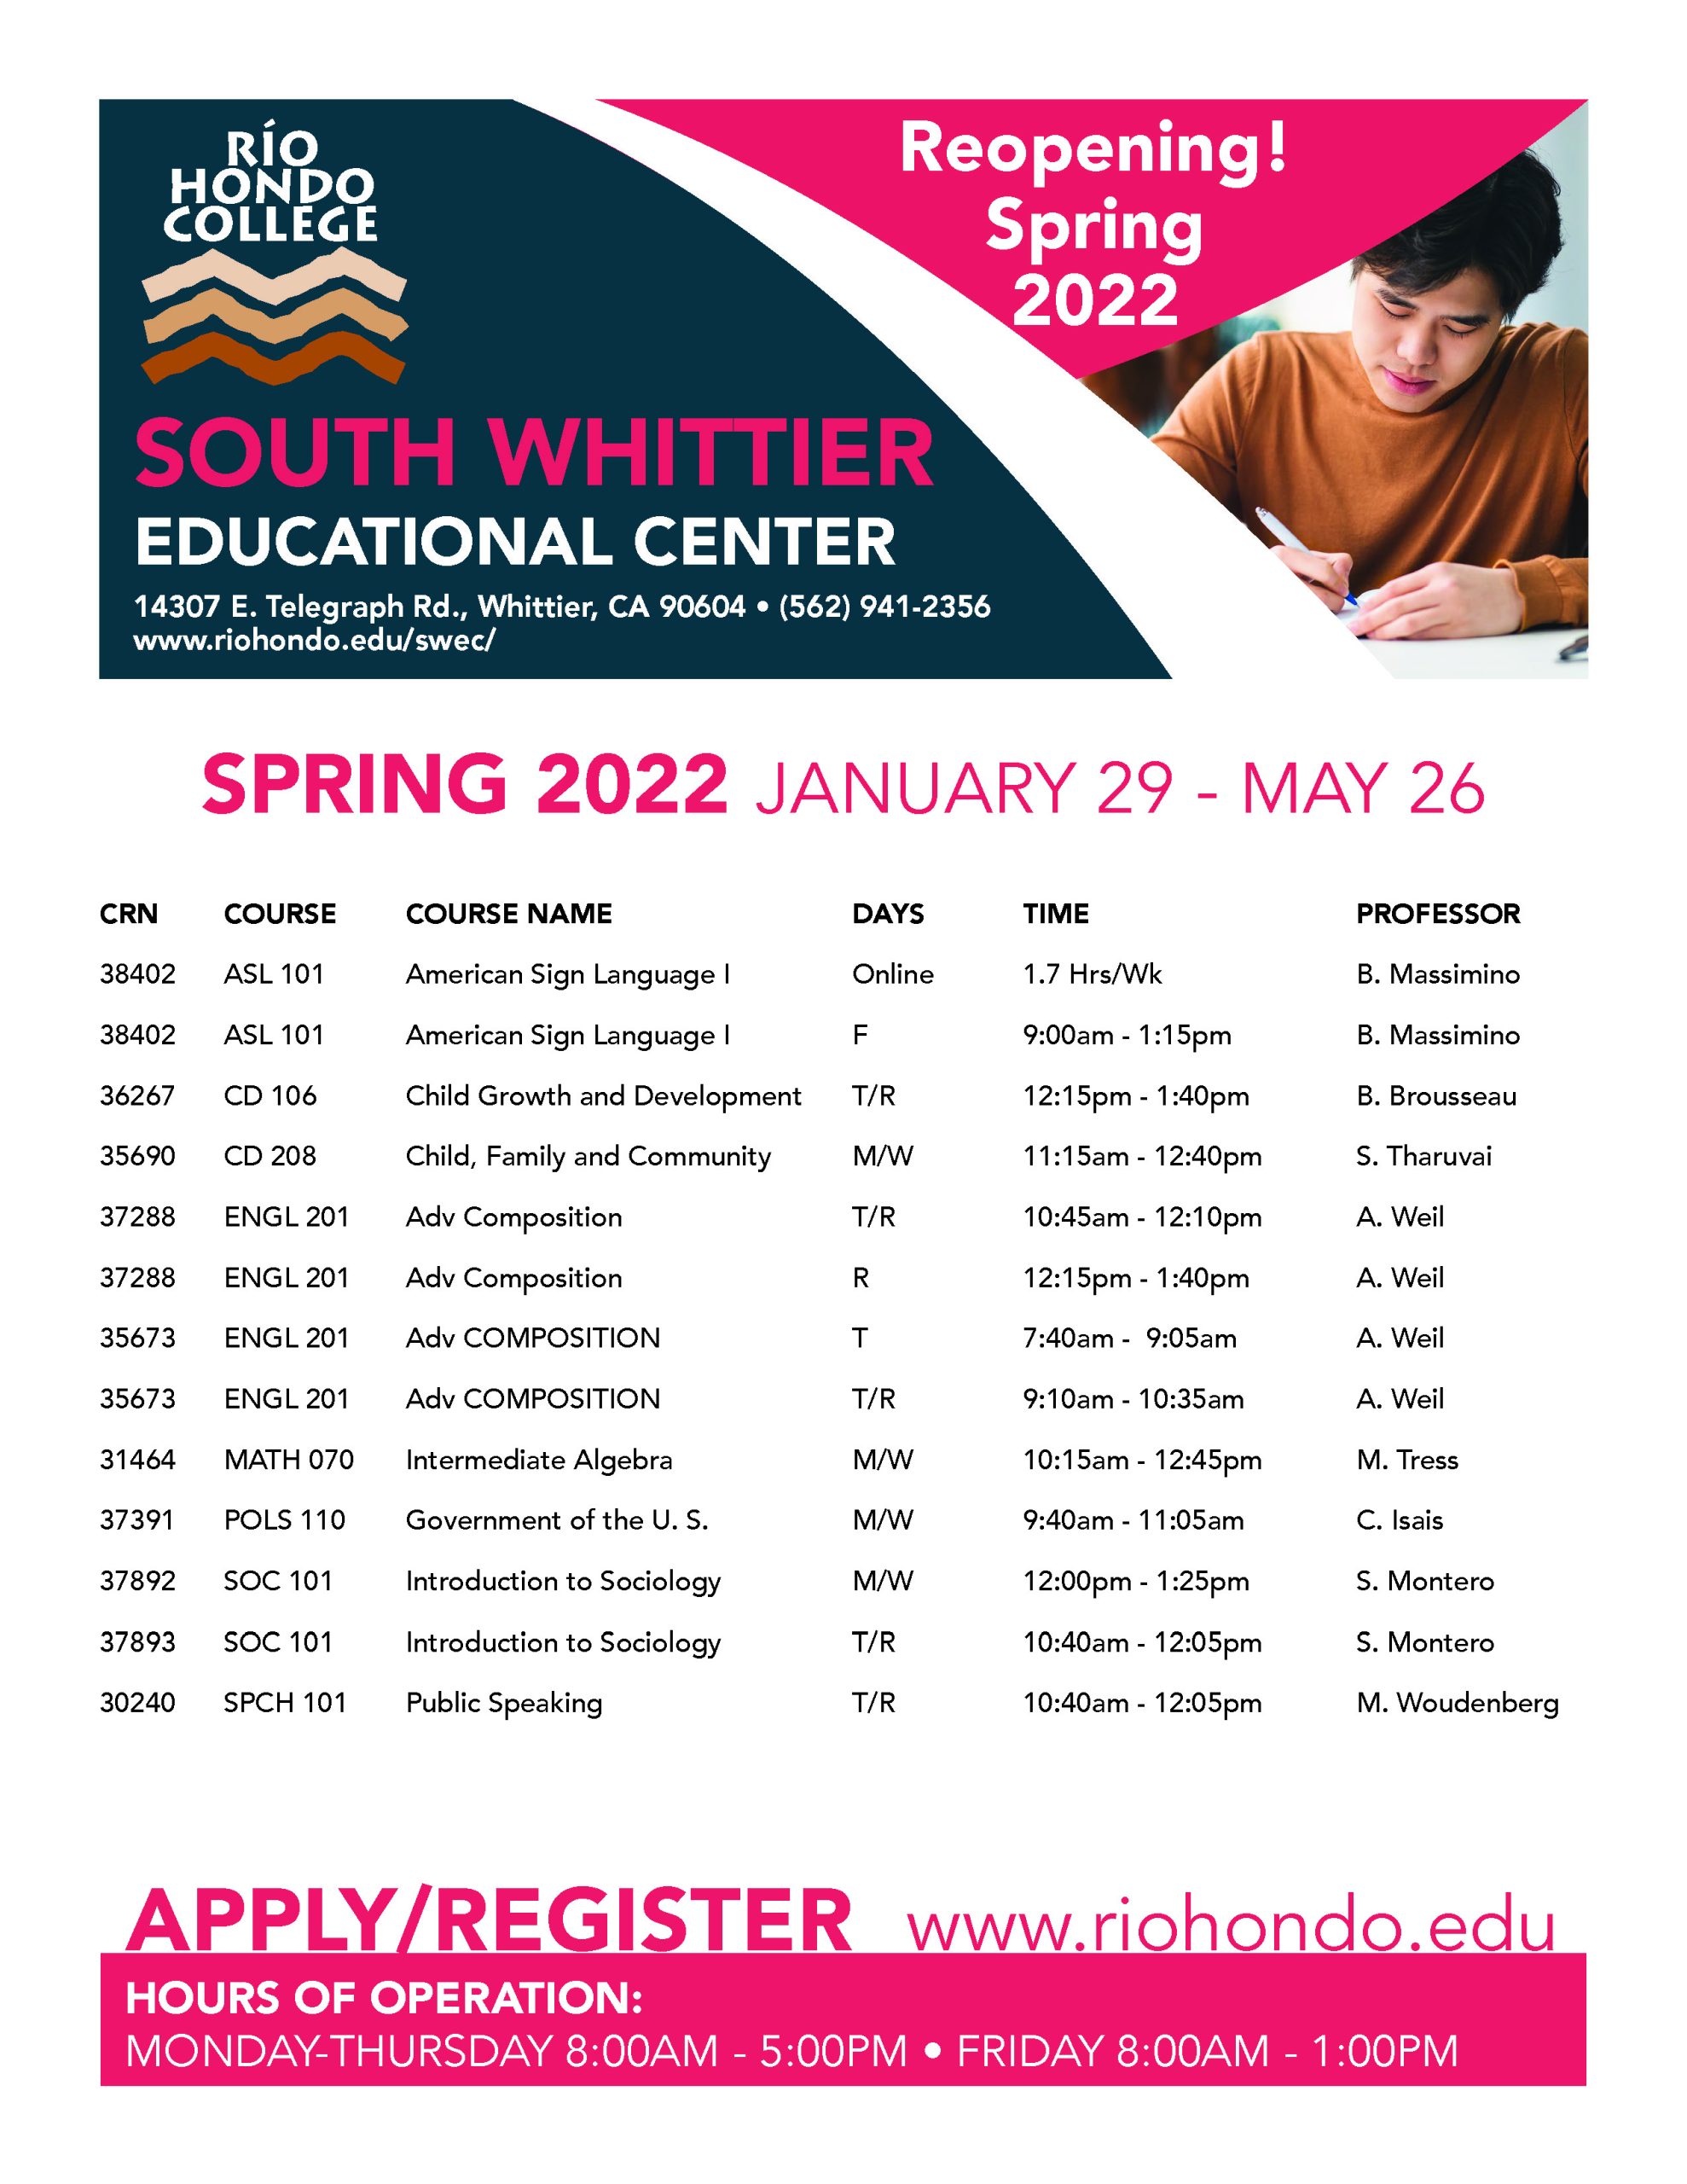 swec courses spring 2022